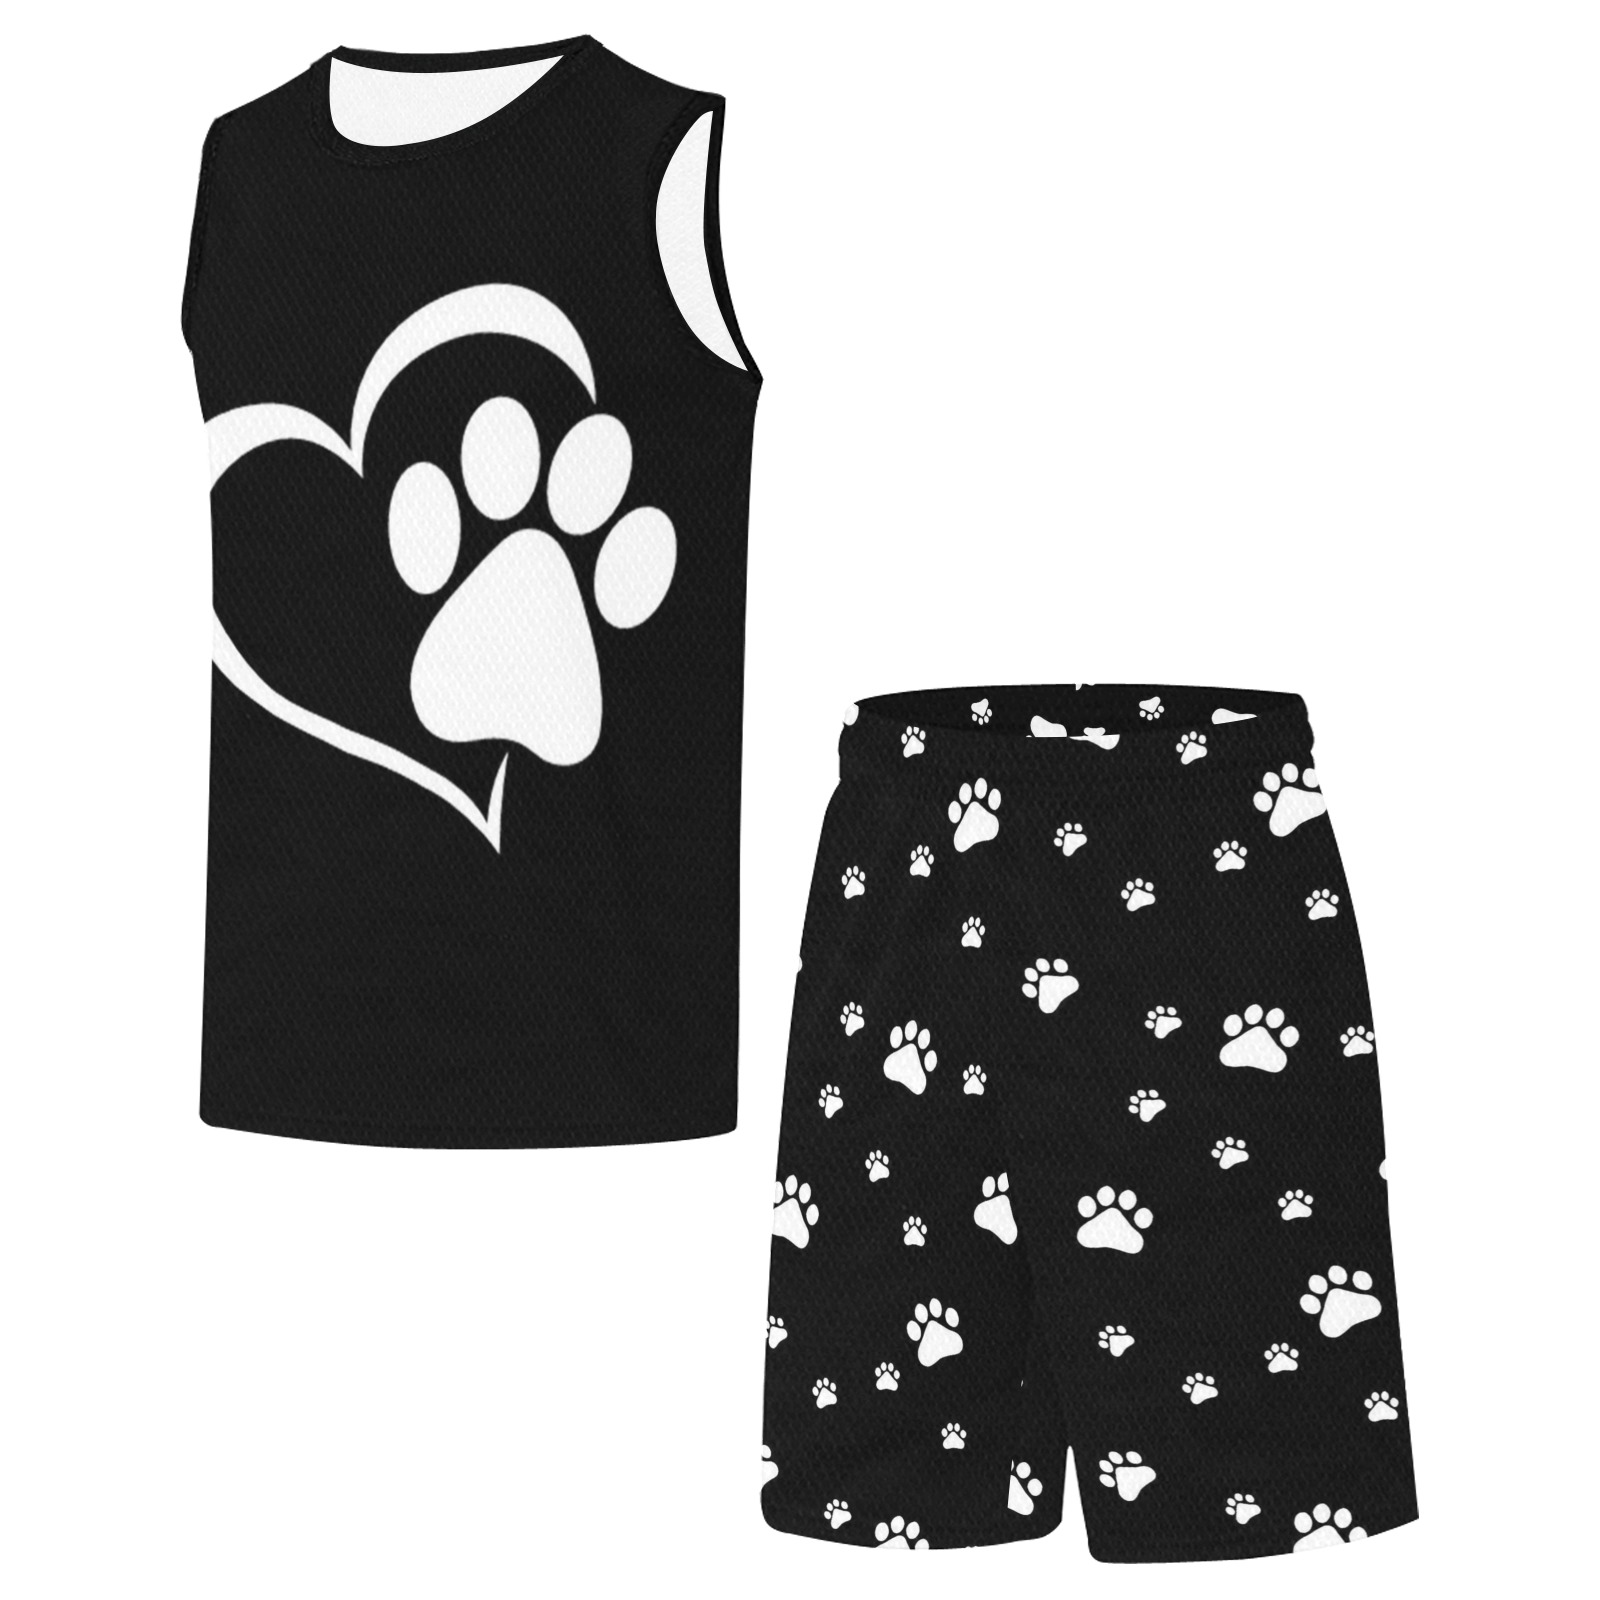 Puppy Owner by Fetishworld All Over Print Basketball Uniform